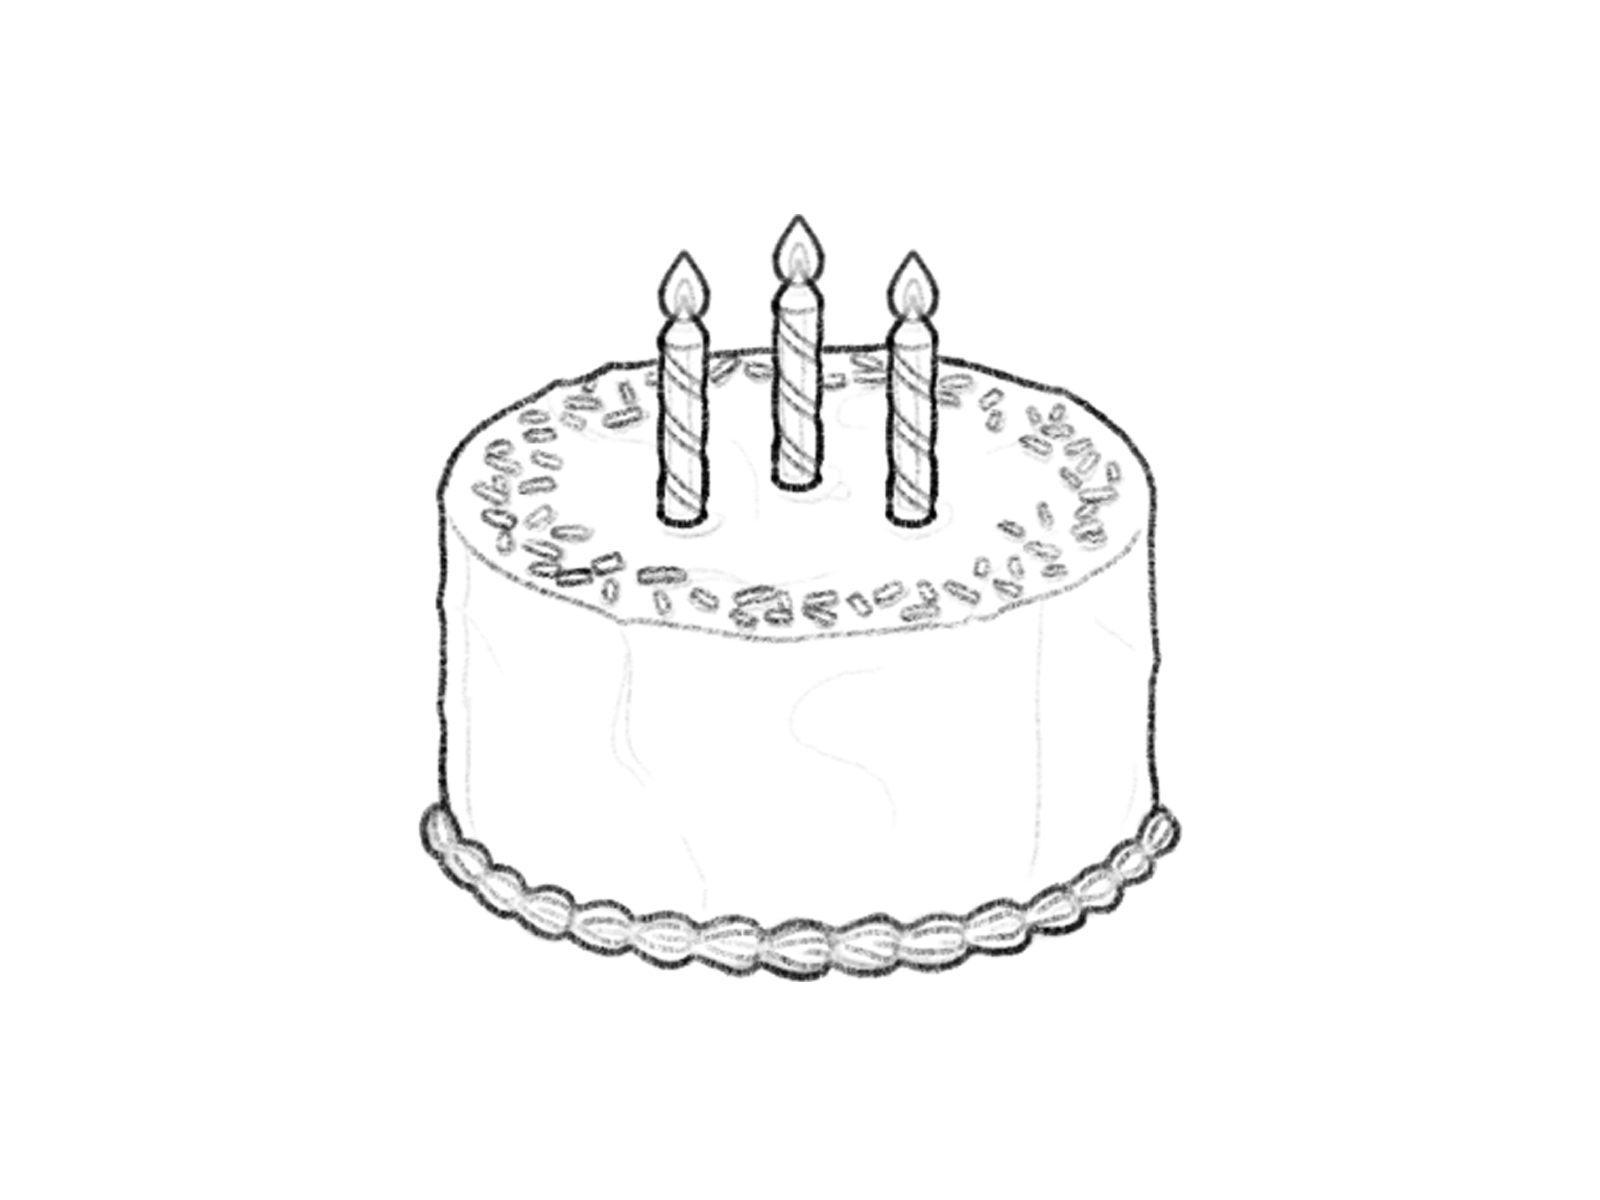 How to Draw a Birthday Cake? (Step by Step) - Easy Drawings